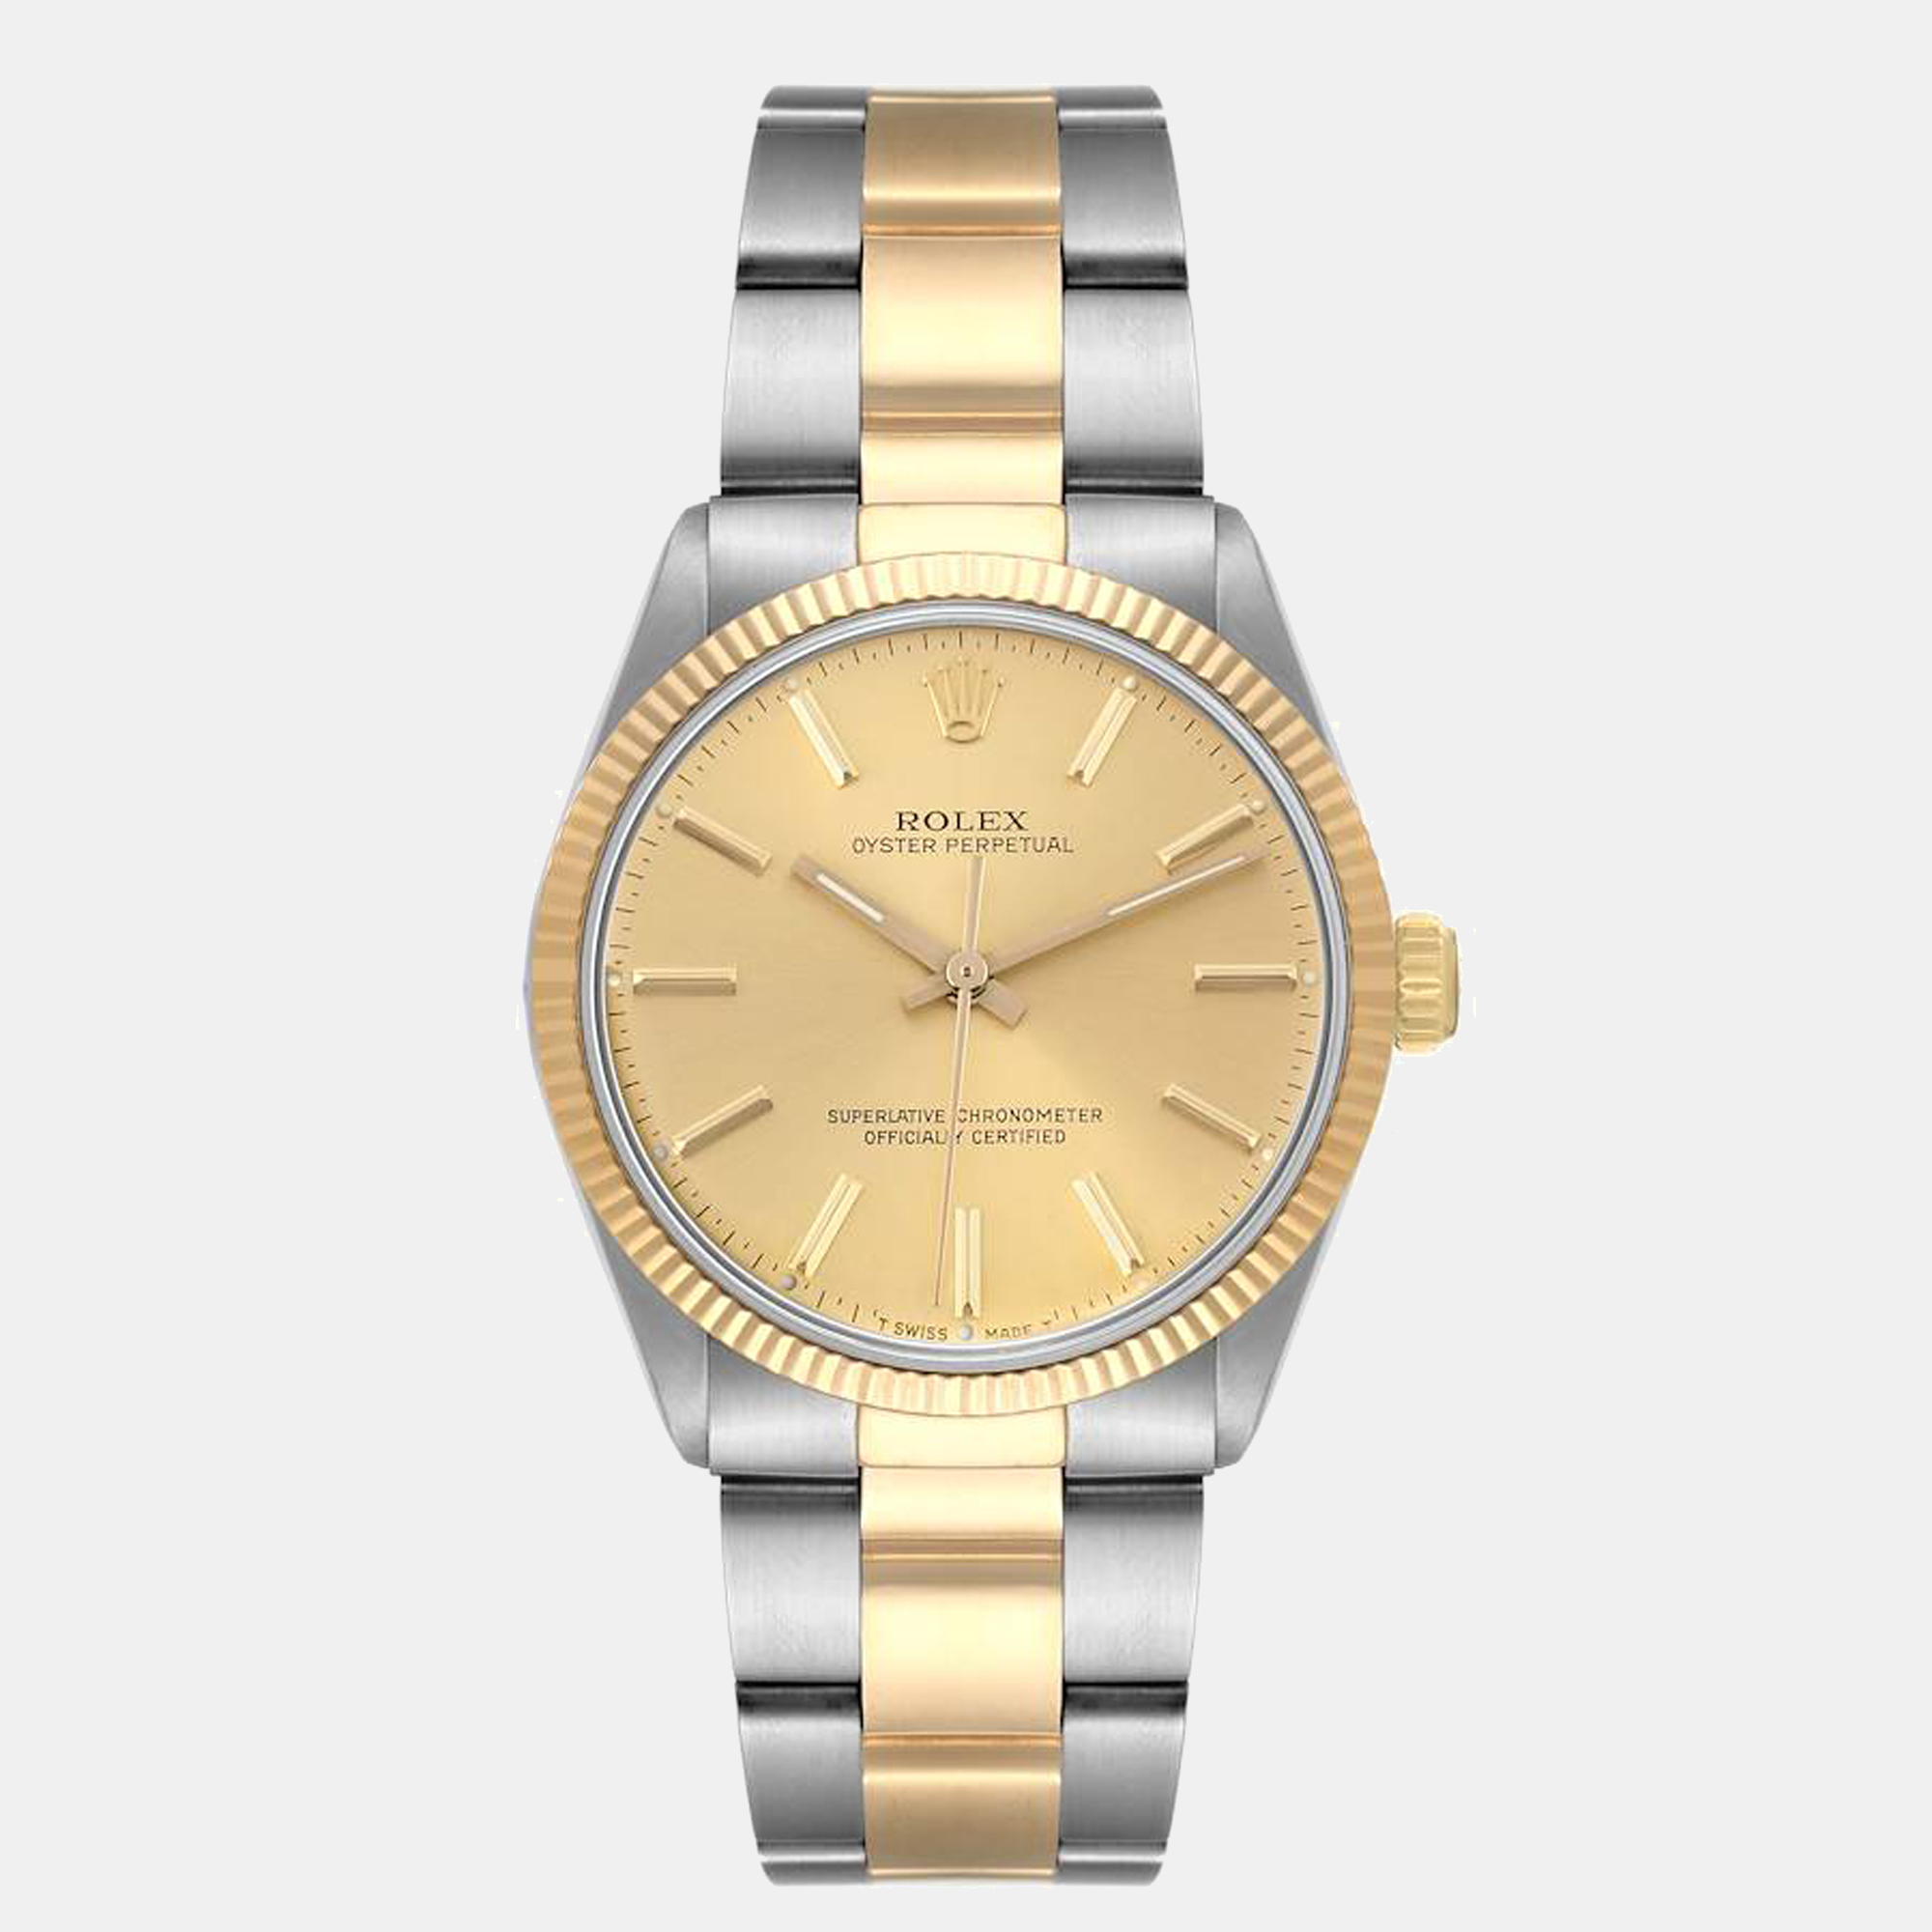 Rolex Oyster Perpetual Steel Yellow Gold Vintage Mens Watch 1005